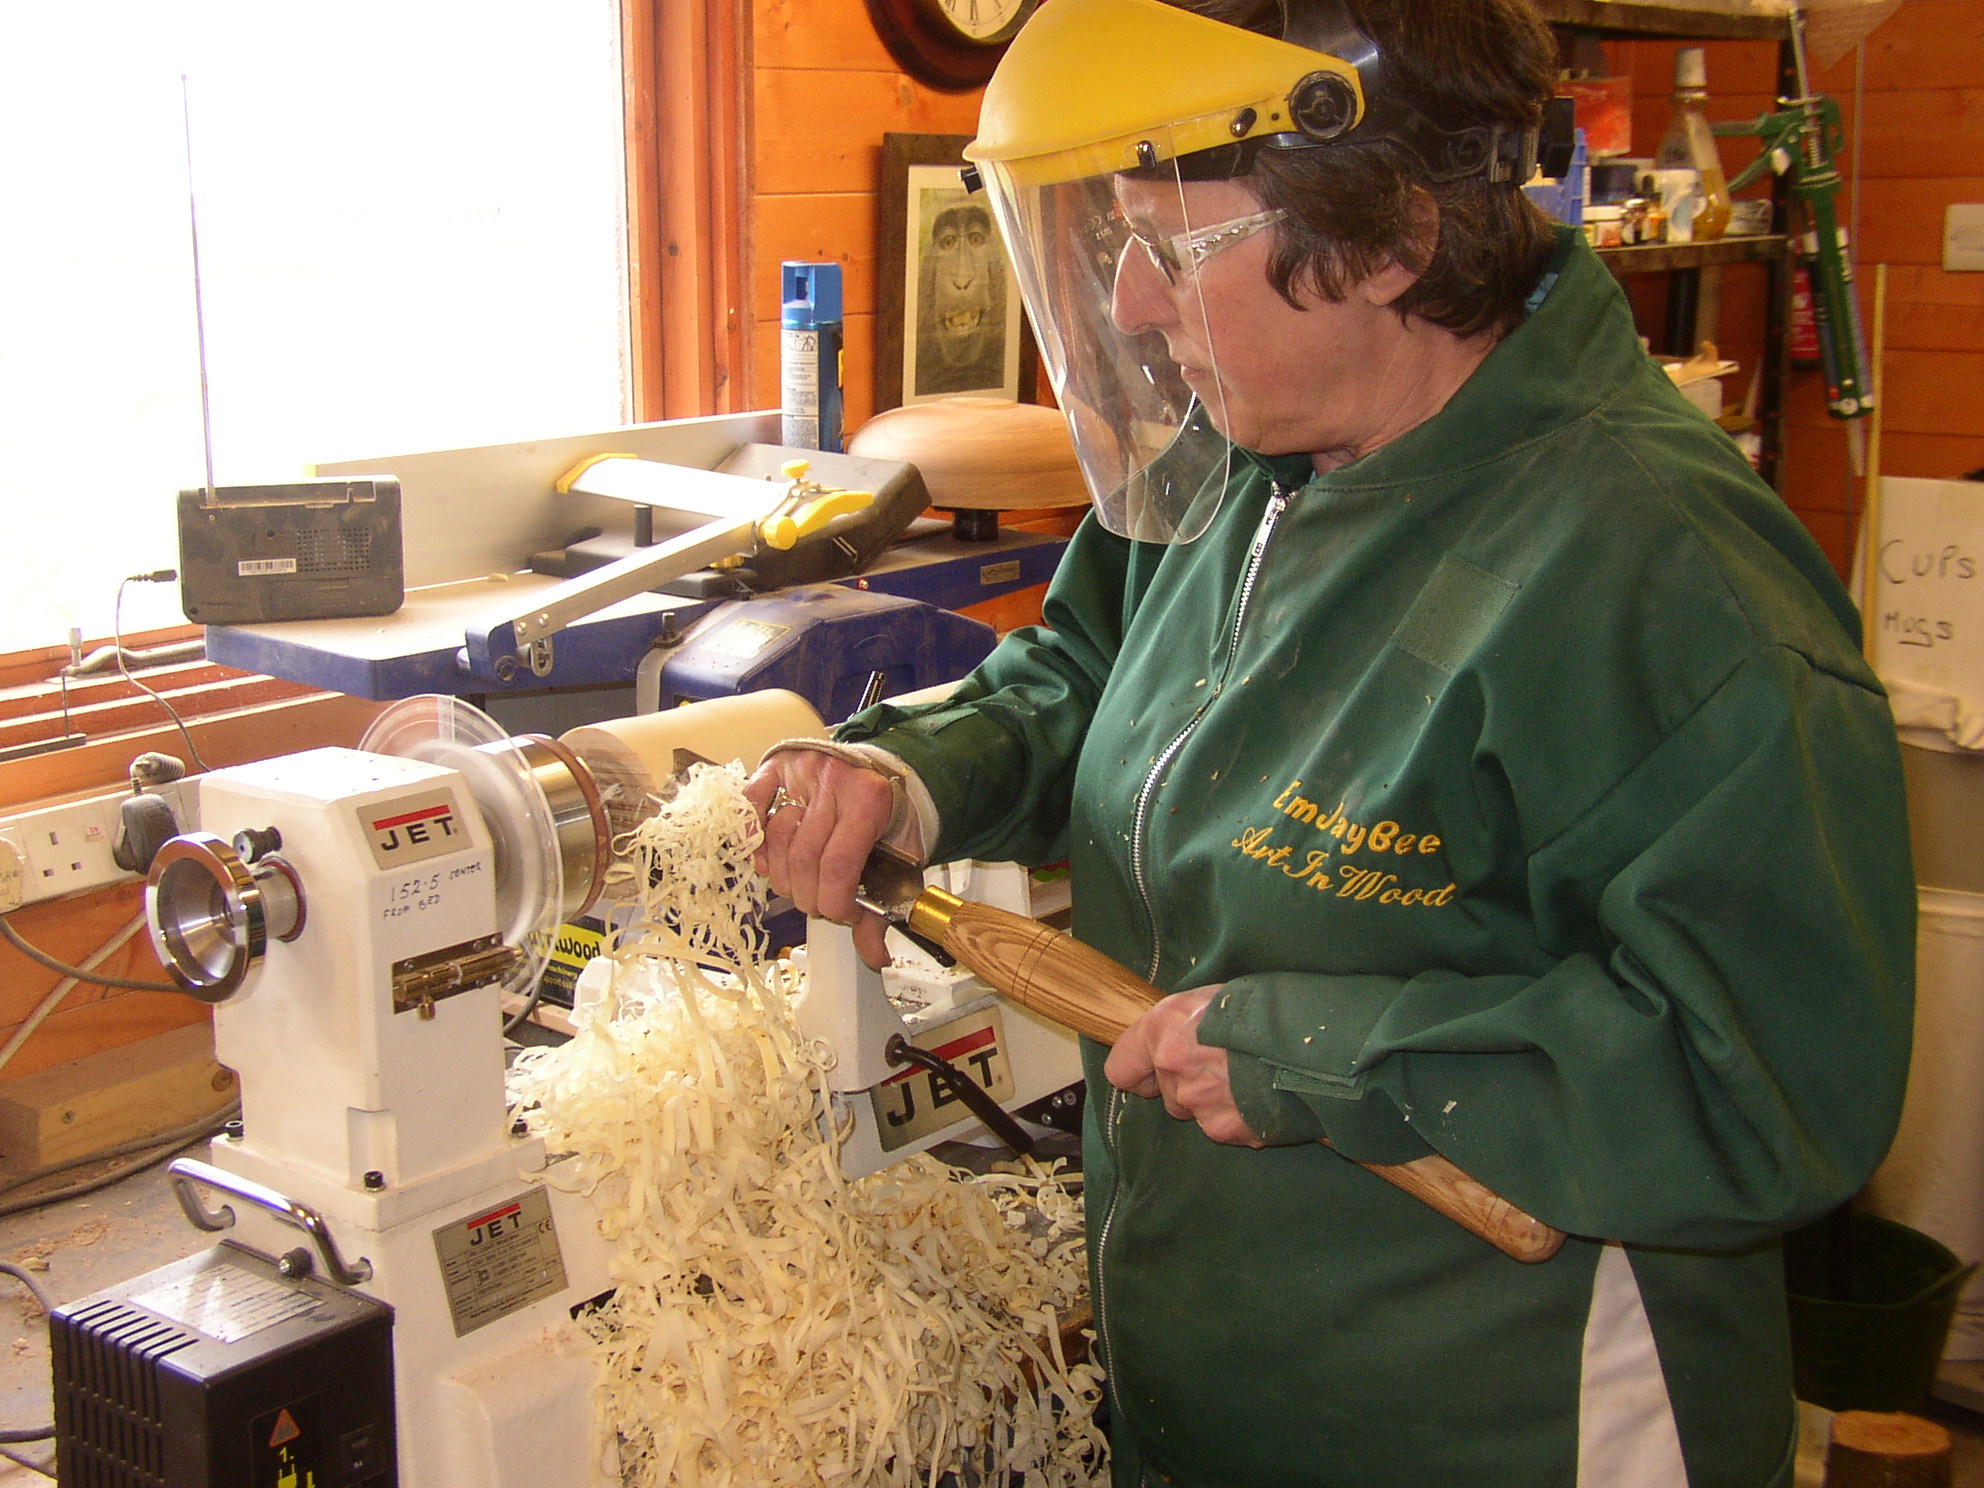 Jan at work on a lathe